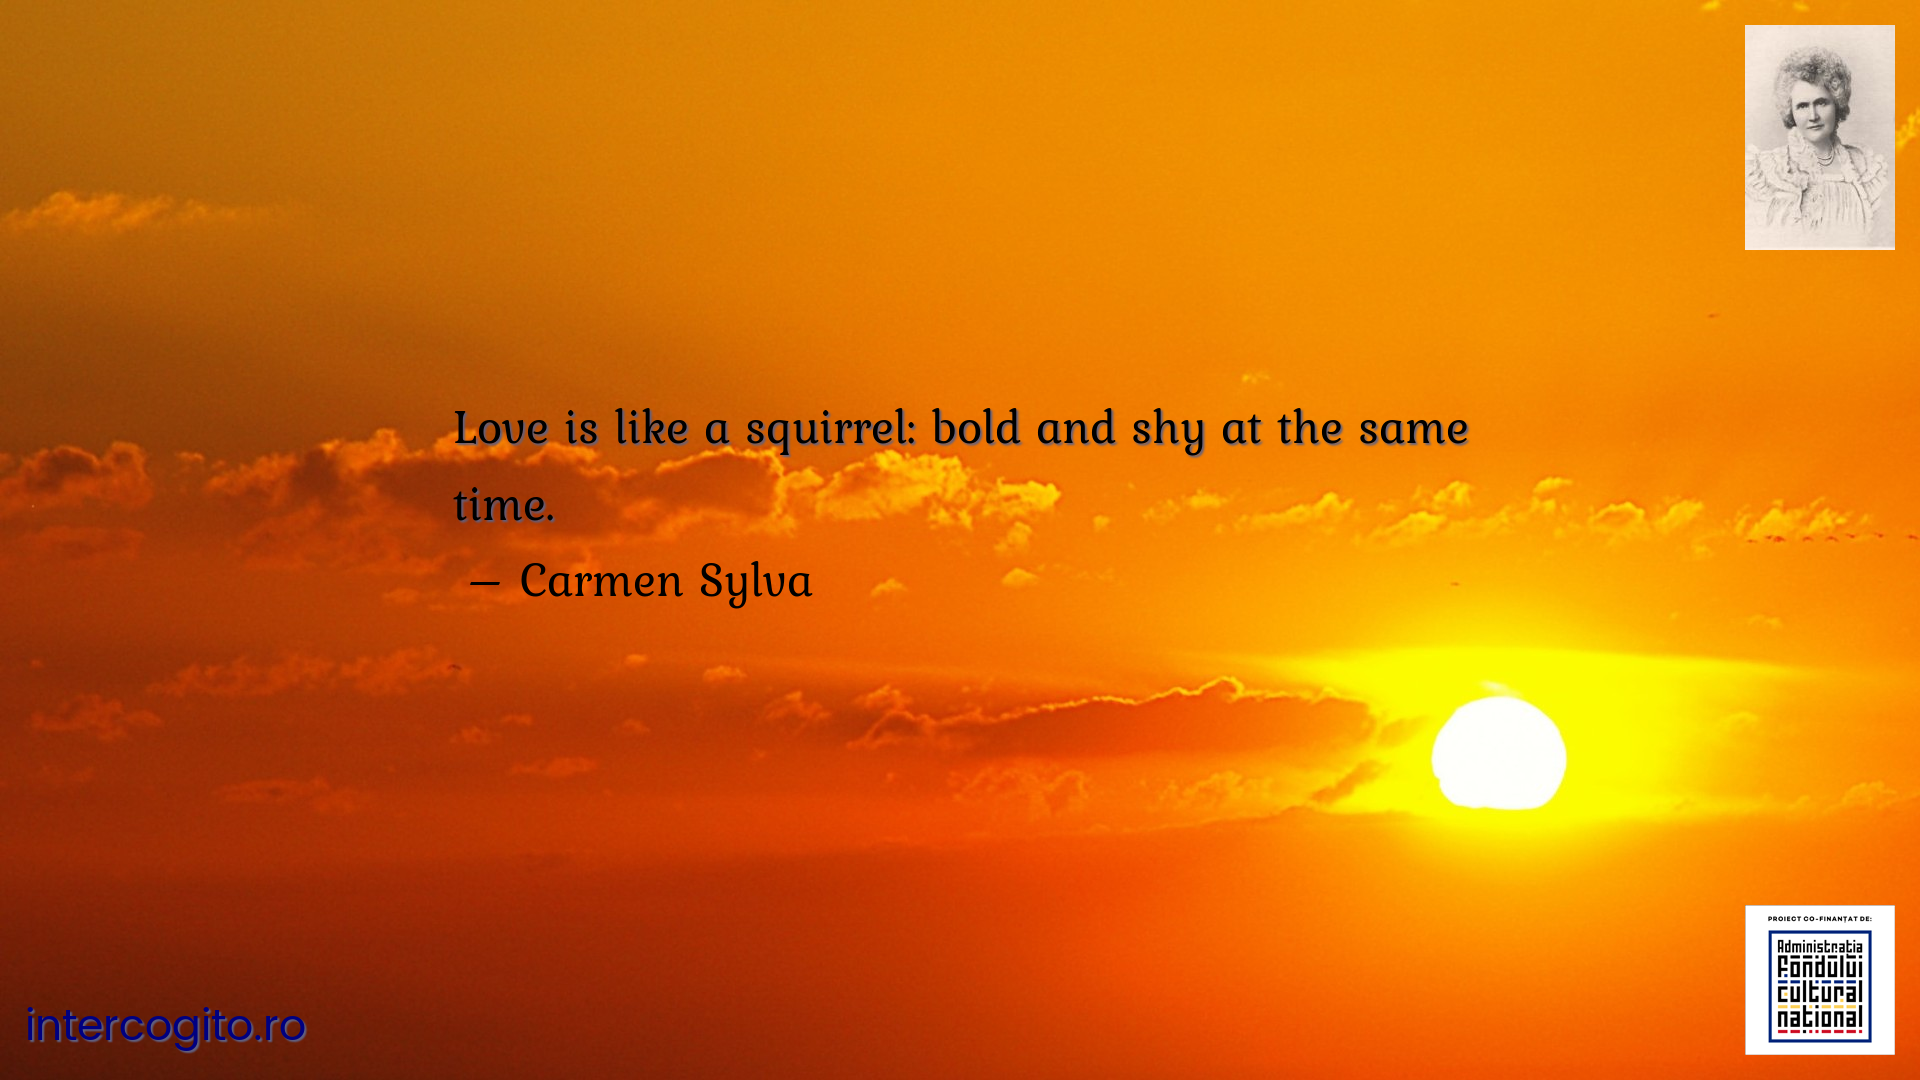 Love is like a squirrel: bold and shy at the same time.